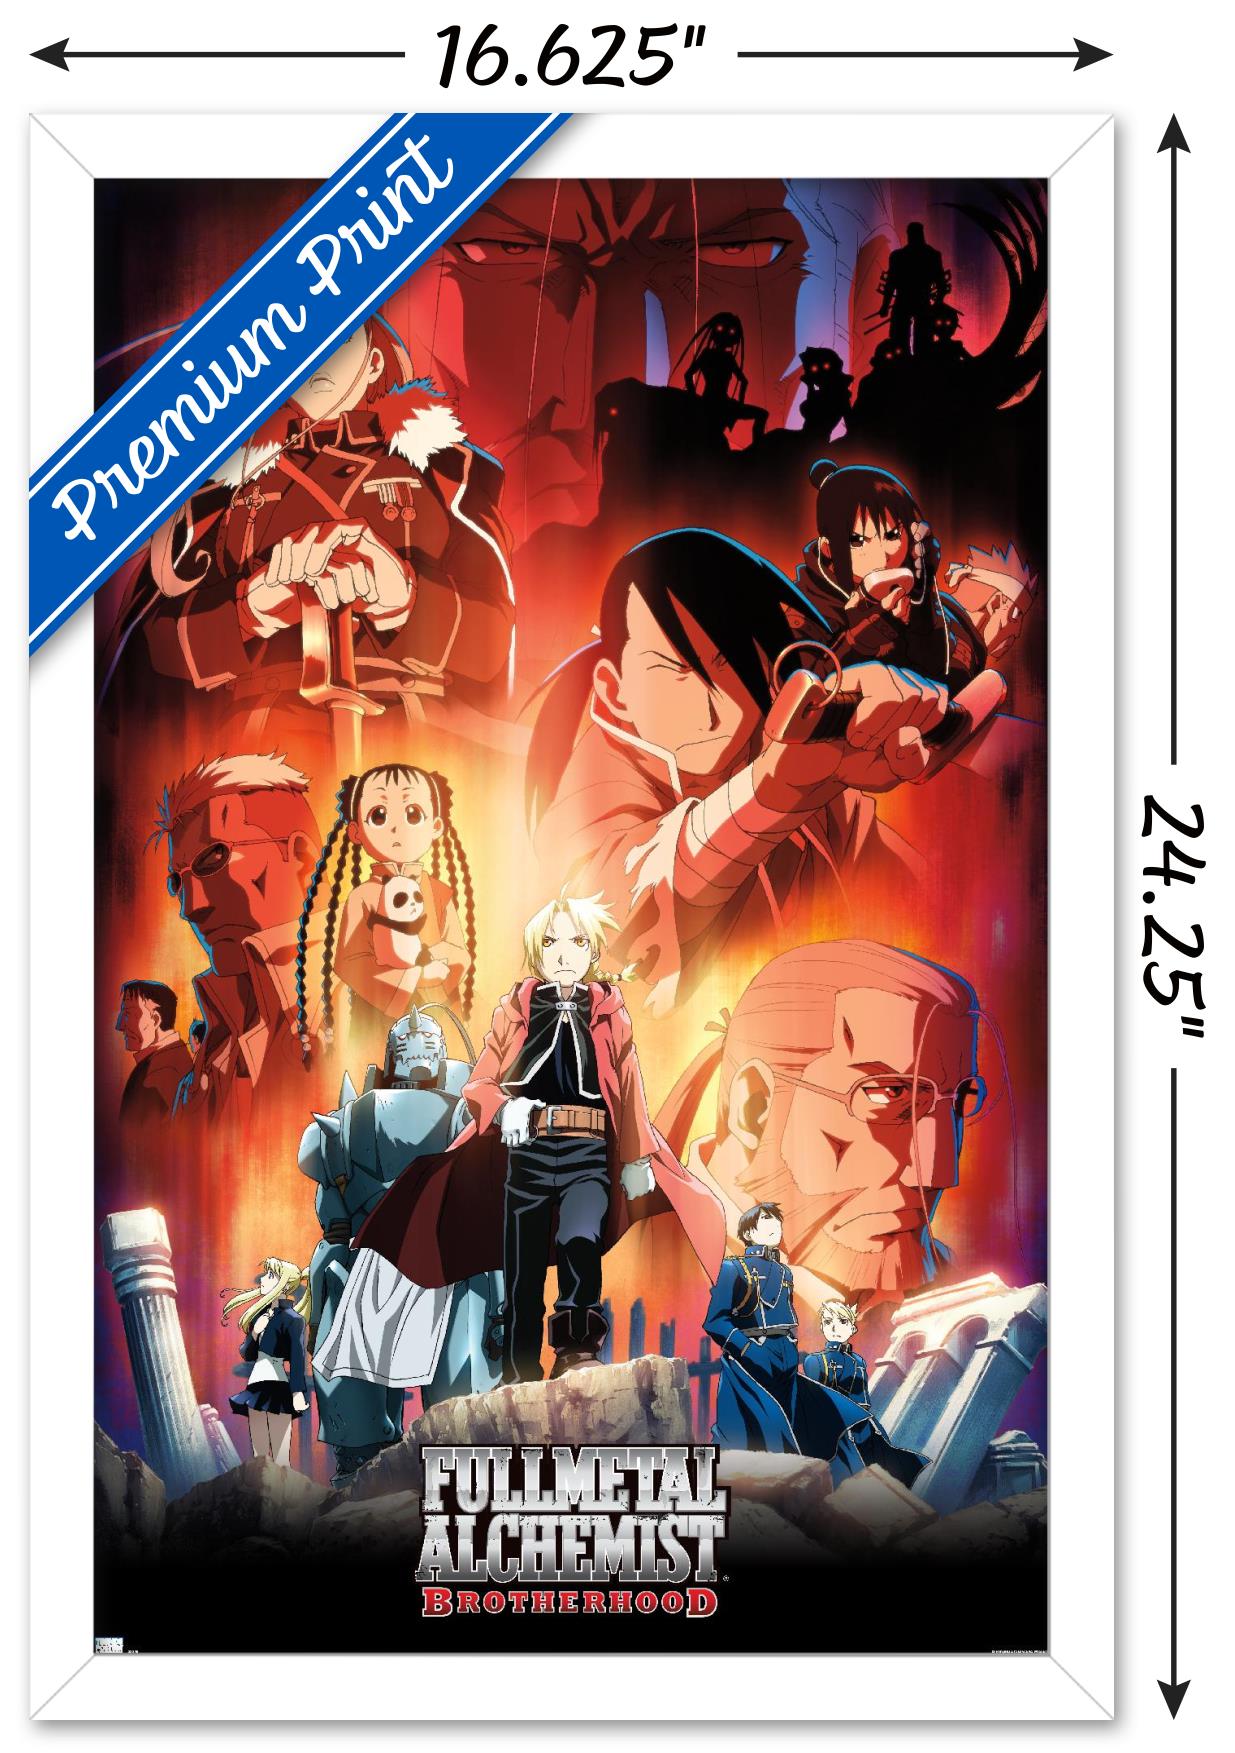  ZKFG Fullmetal Alchemist Brotherhood Anime Poster Classic  Adventure Canvas Art Poster and Wall Art Picture Print Modern Family  Bedroom Decor Posters 12x18inch(30x45cm): Posters & Prints